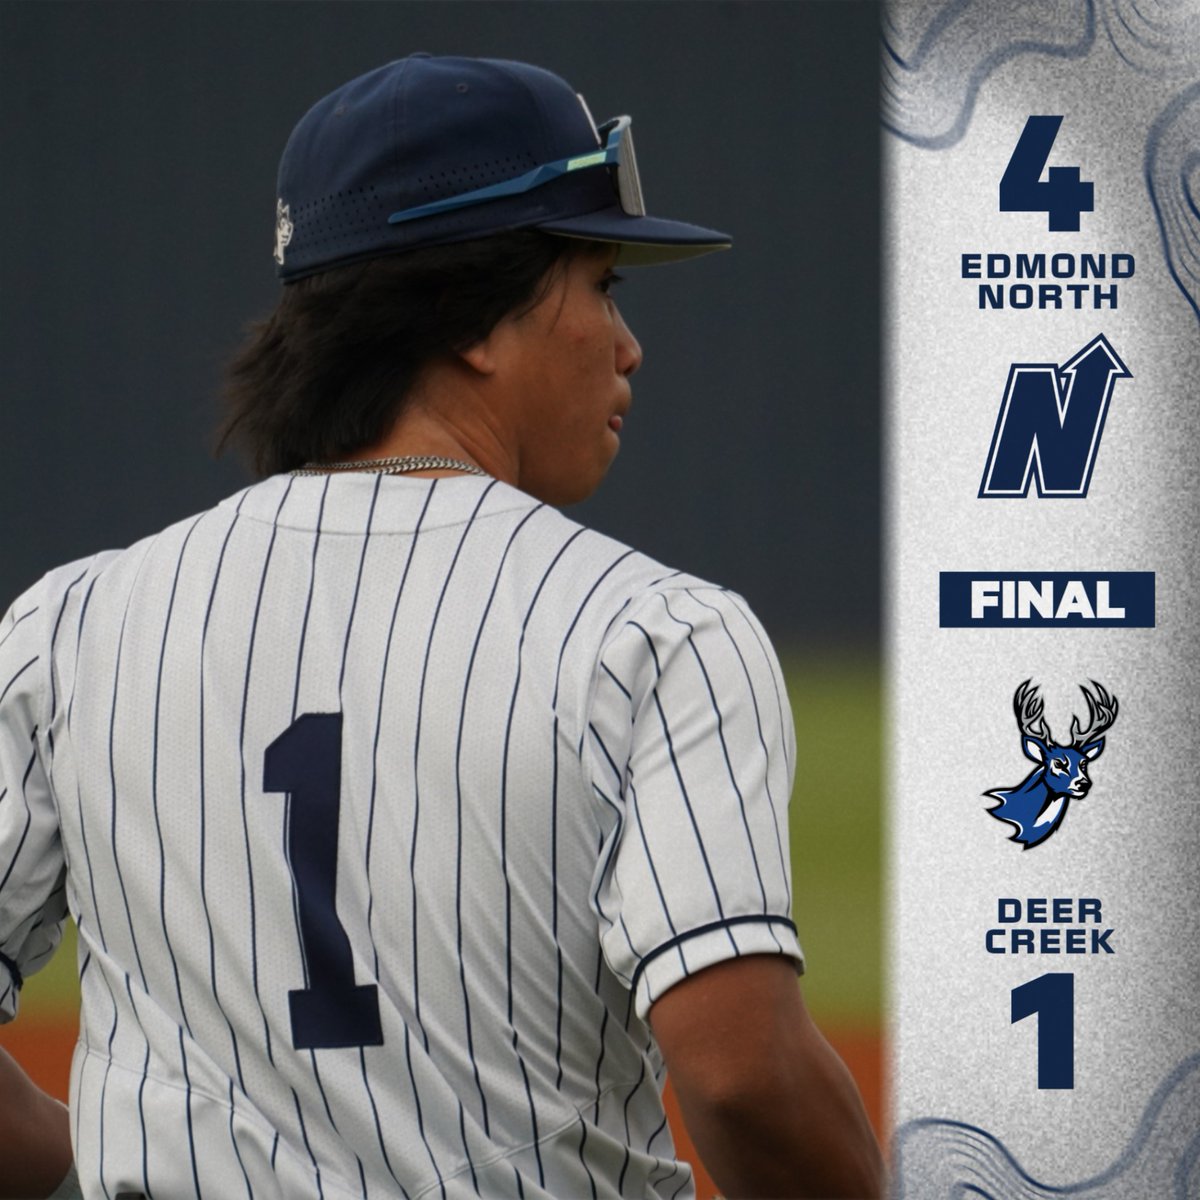 Edmond North Baseball gets another dominant pitching performance from Pryce Bender and earns a split with Deer Creek in their district series. With their win, the Huskies earn the opportunity to host Regionals! #HuskyNation #uN1ty @EdNorthBaseball @edmondnorthbaseball